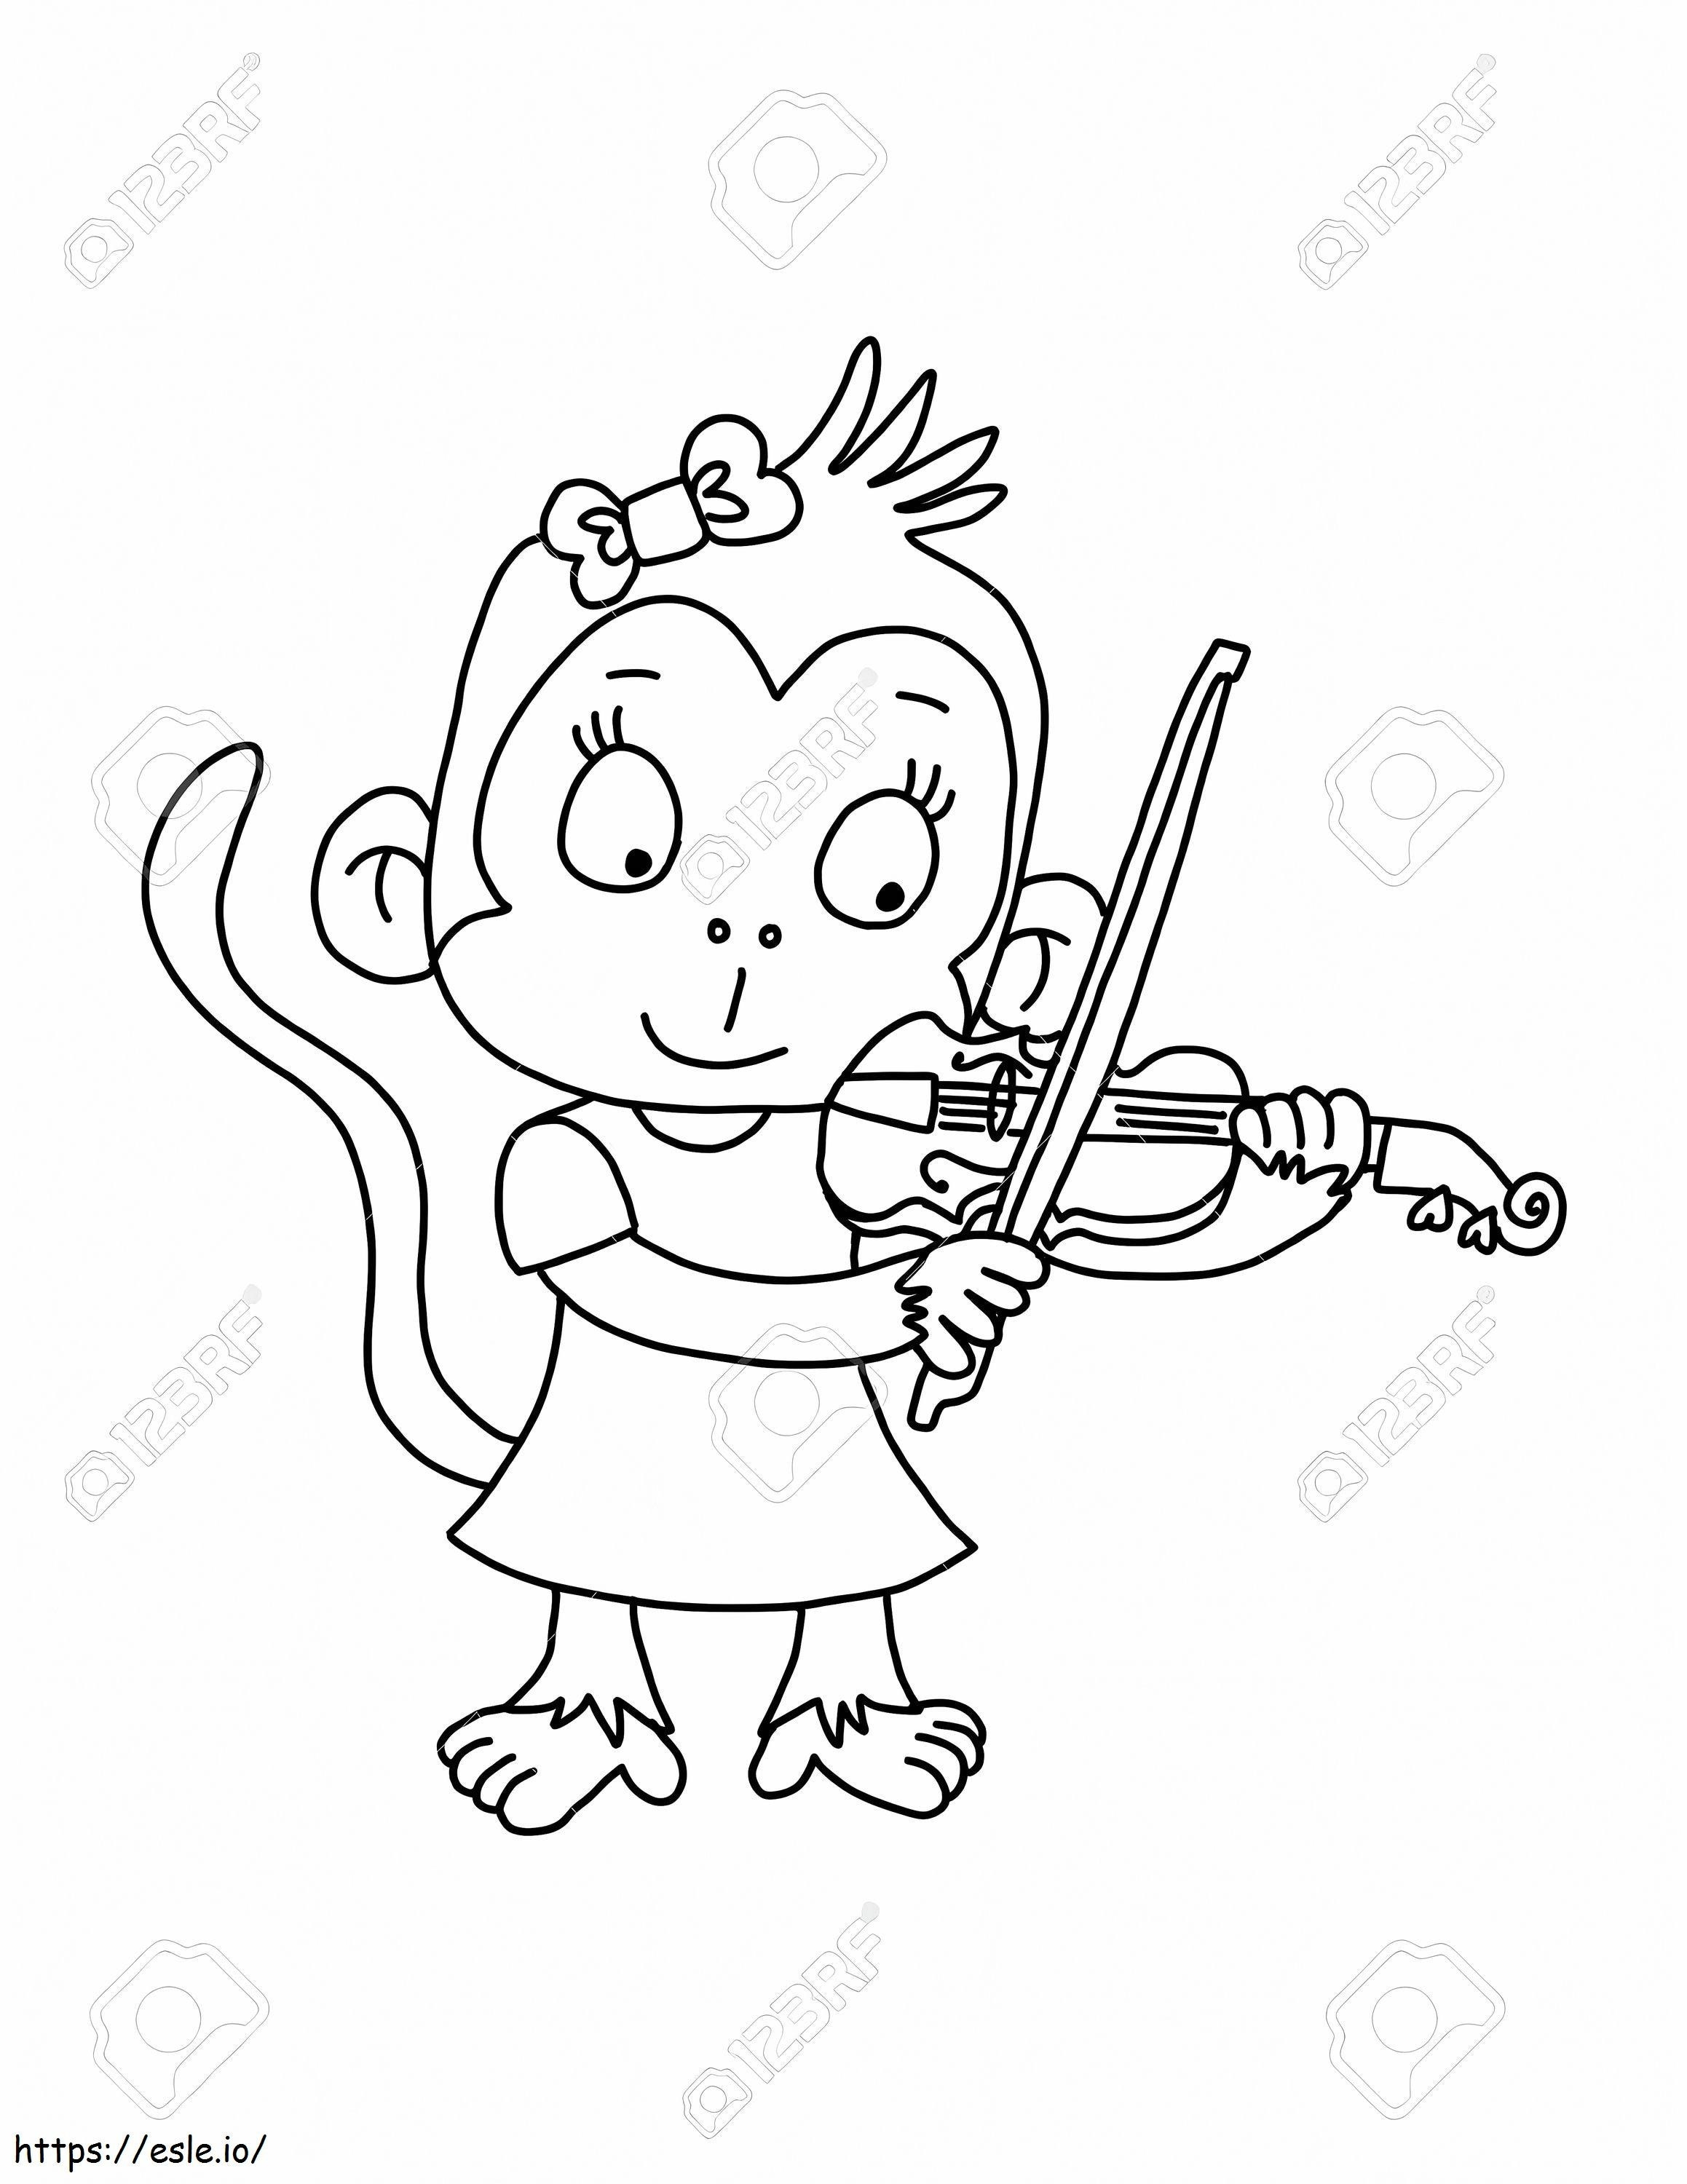 1539402795 69128129 Cute Monkey Playing Violin coloring page